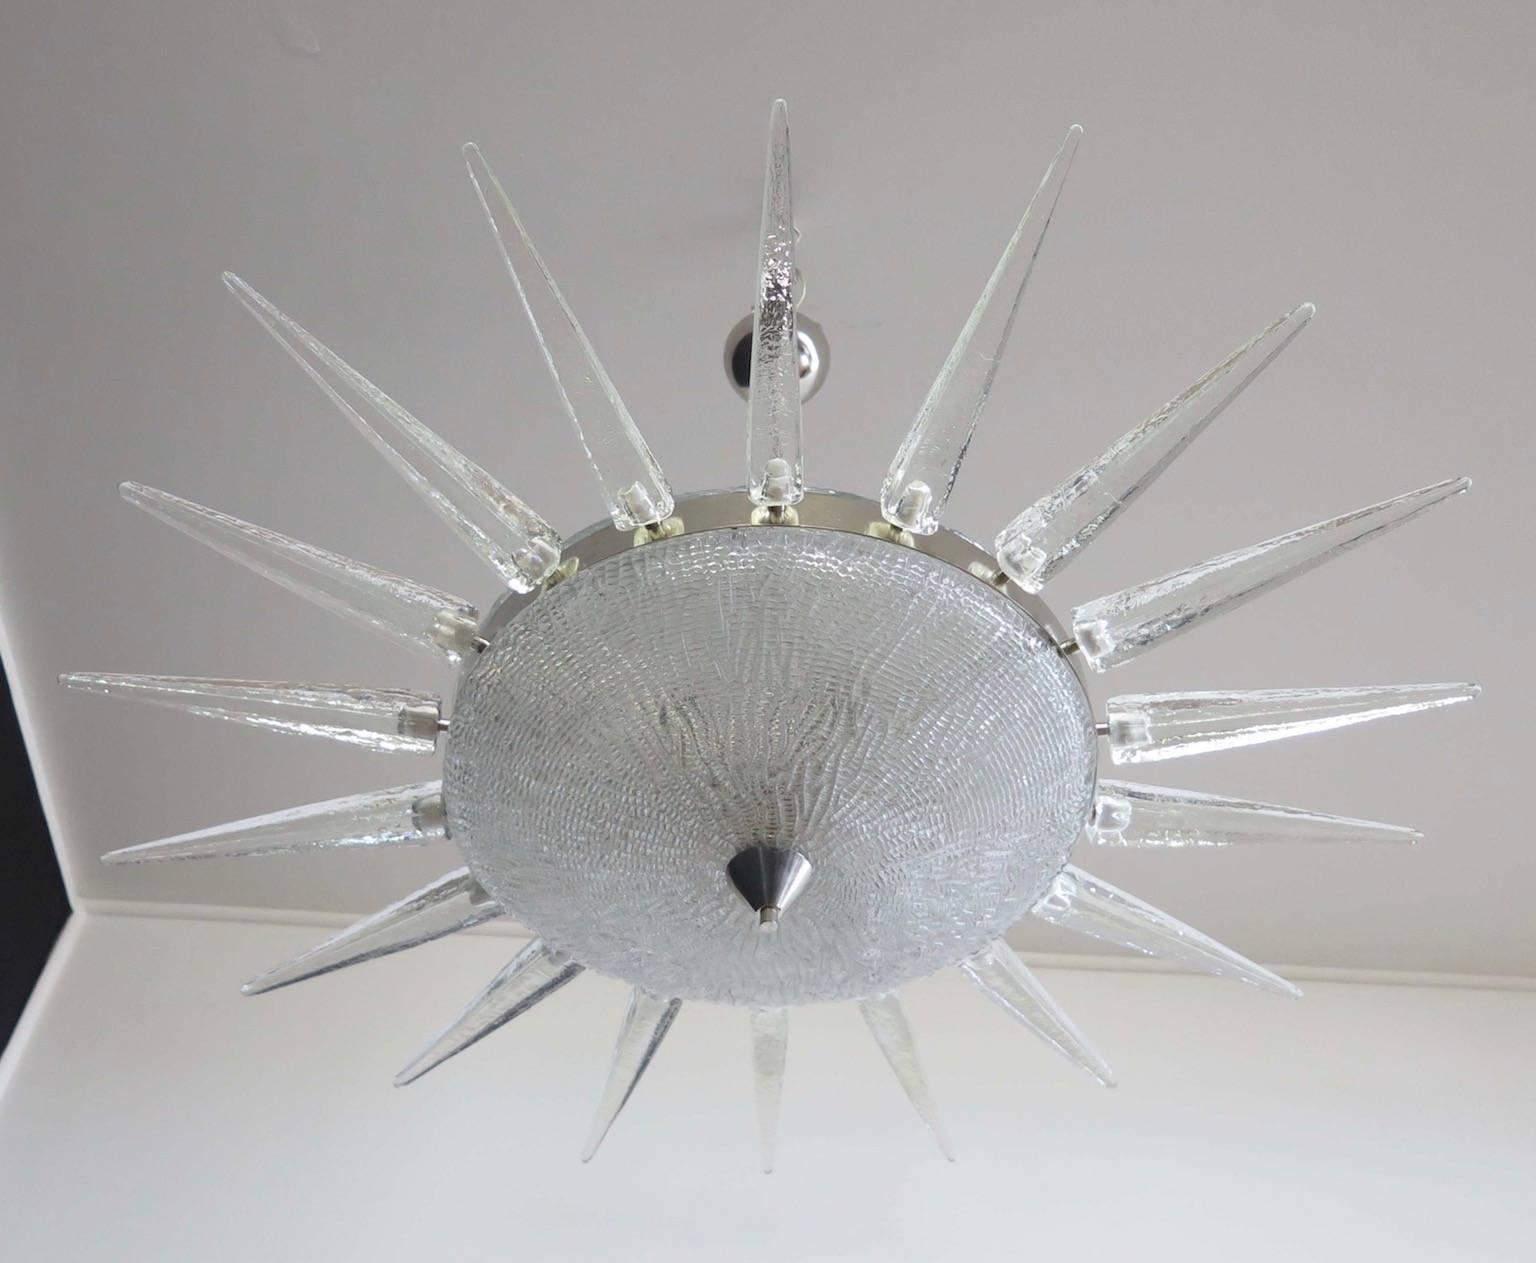 Sunburst-form Sputnik Murano glass chandelier in the style of Seguso from circa 2000 in a nickel frame surrounding central glass bowl and dome surrounded by 18 glass 'rays.' Each glass ray measures 11.8